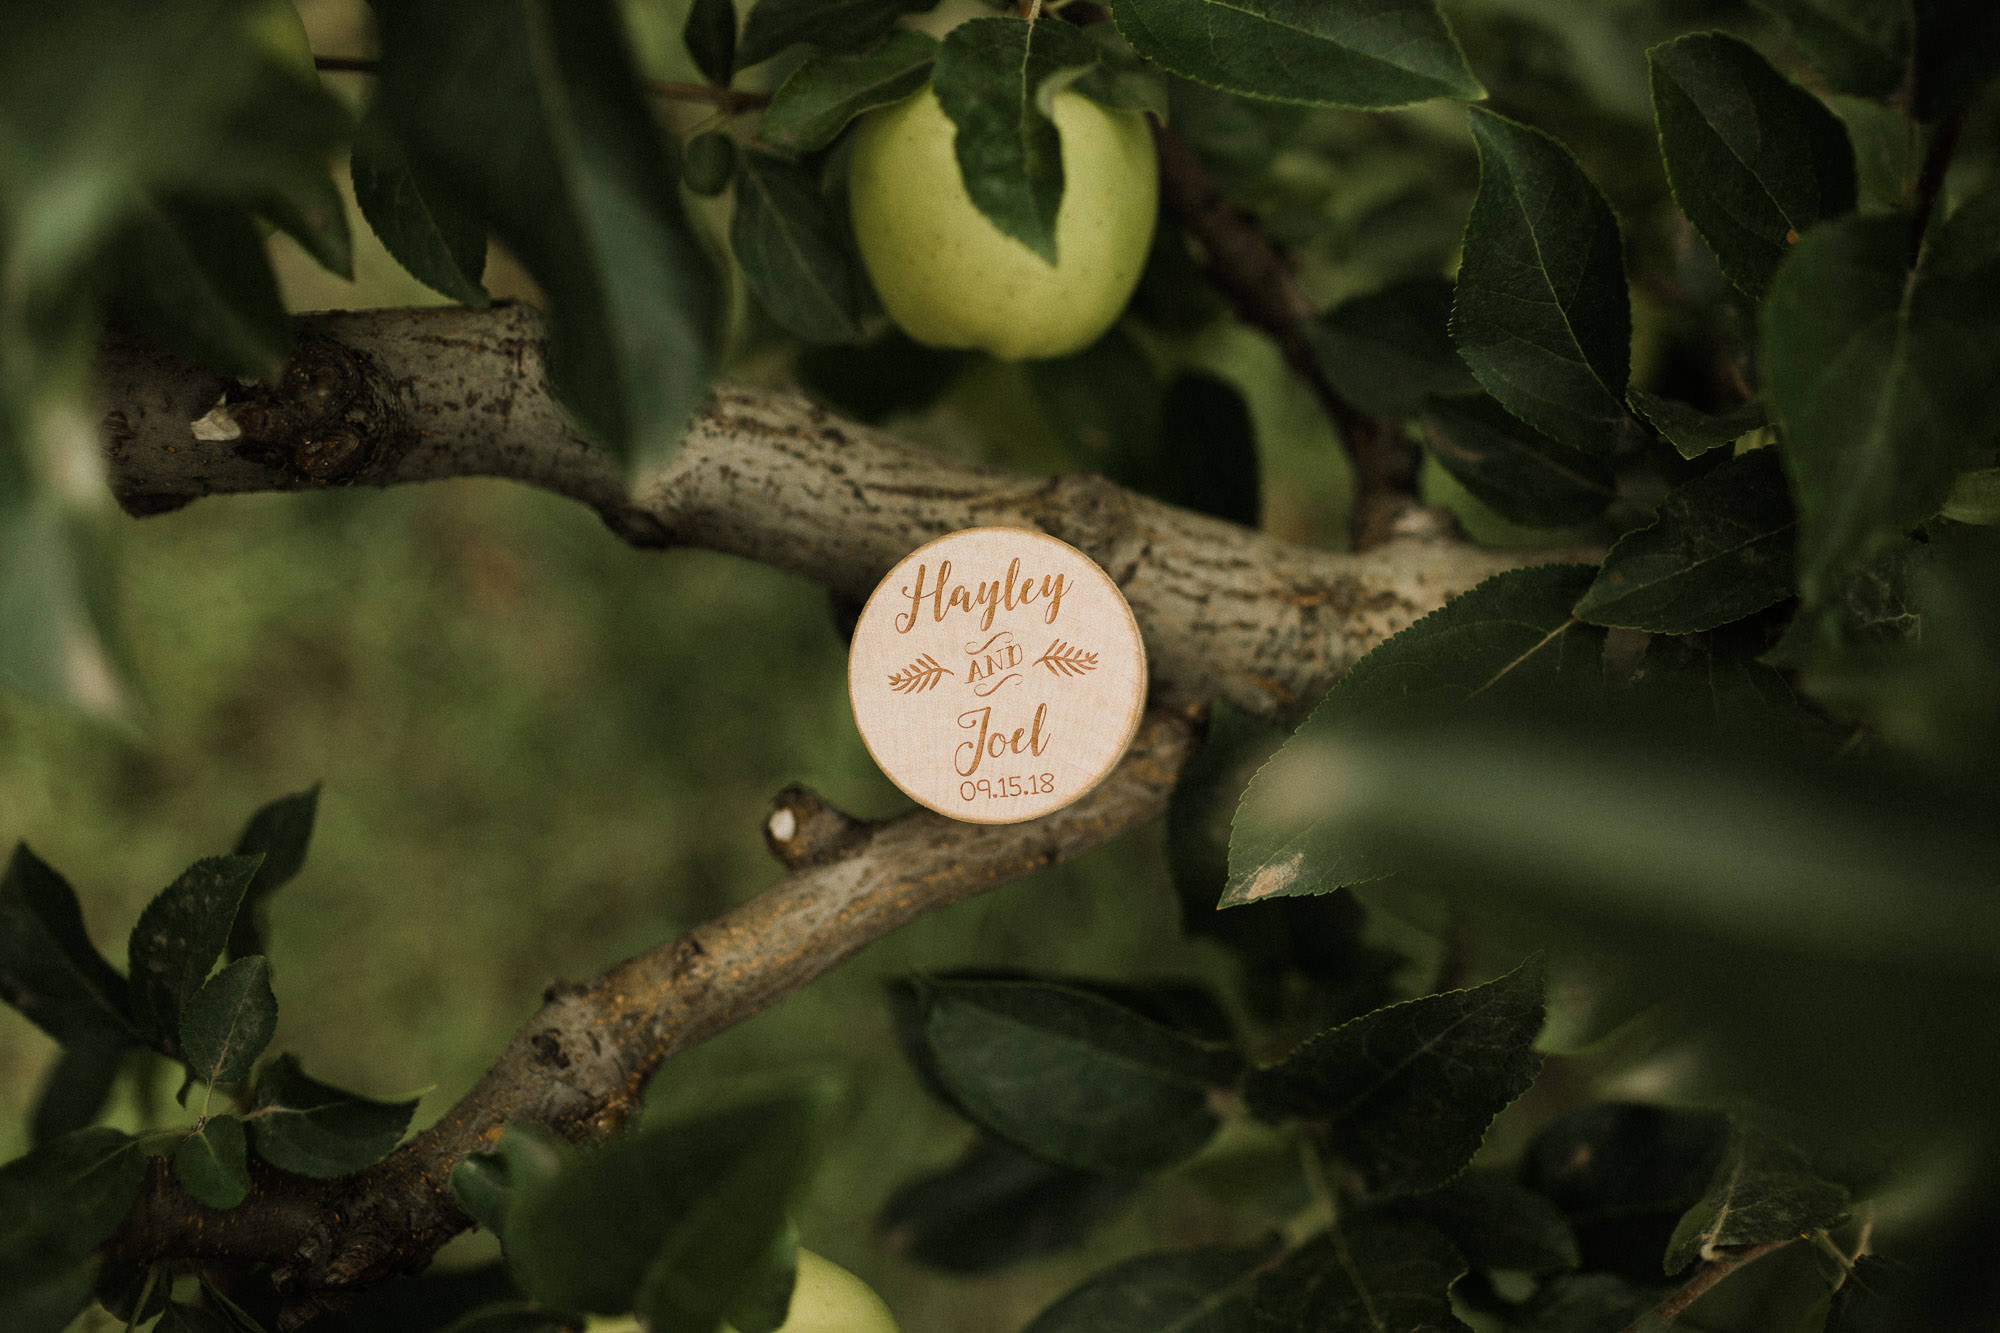 A ring box inscribed with "Hayley and Joel, 09.15.18" rests on the branch of an apple tree in Mt. Hood, Oregon.